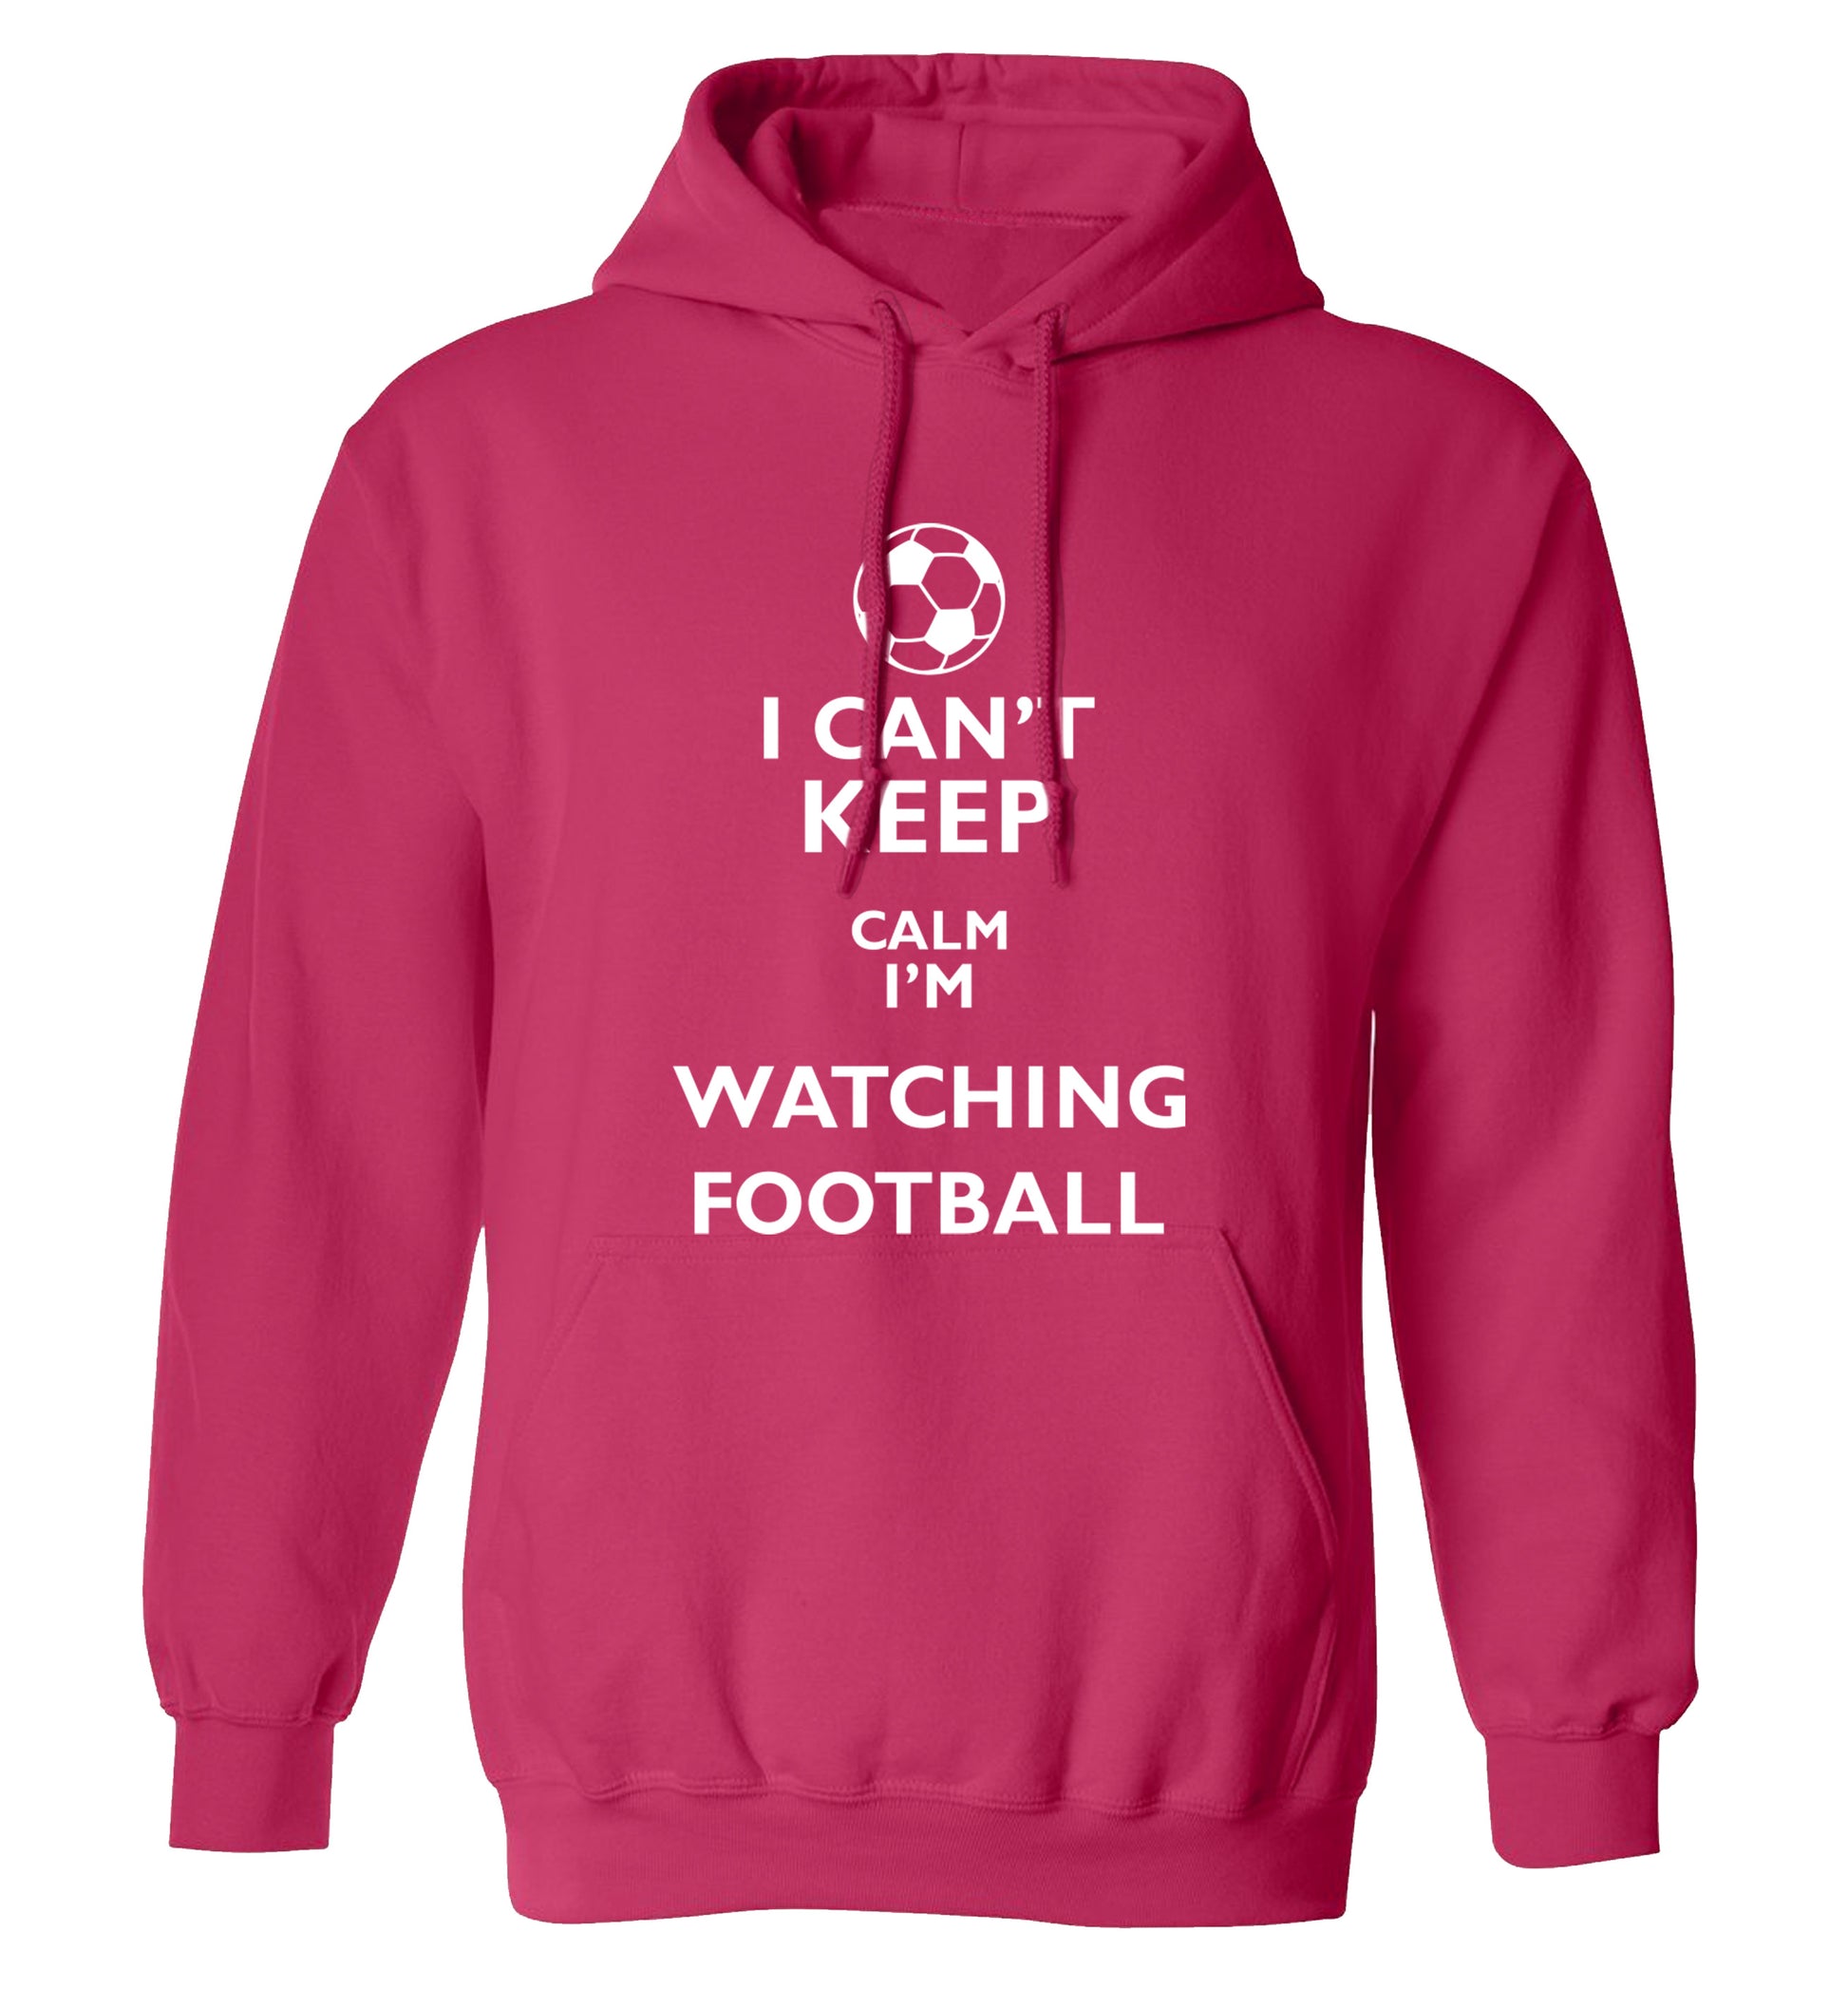 I can't keep calm I'm watching the football adults unisexpink hoodie 2XL